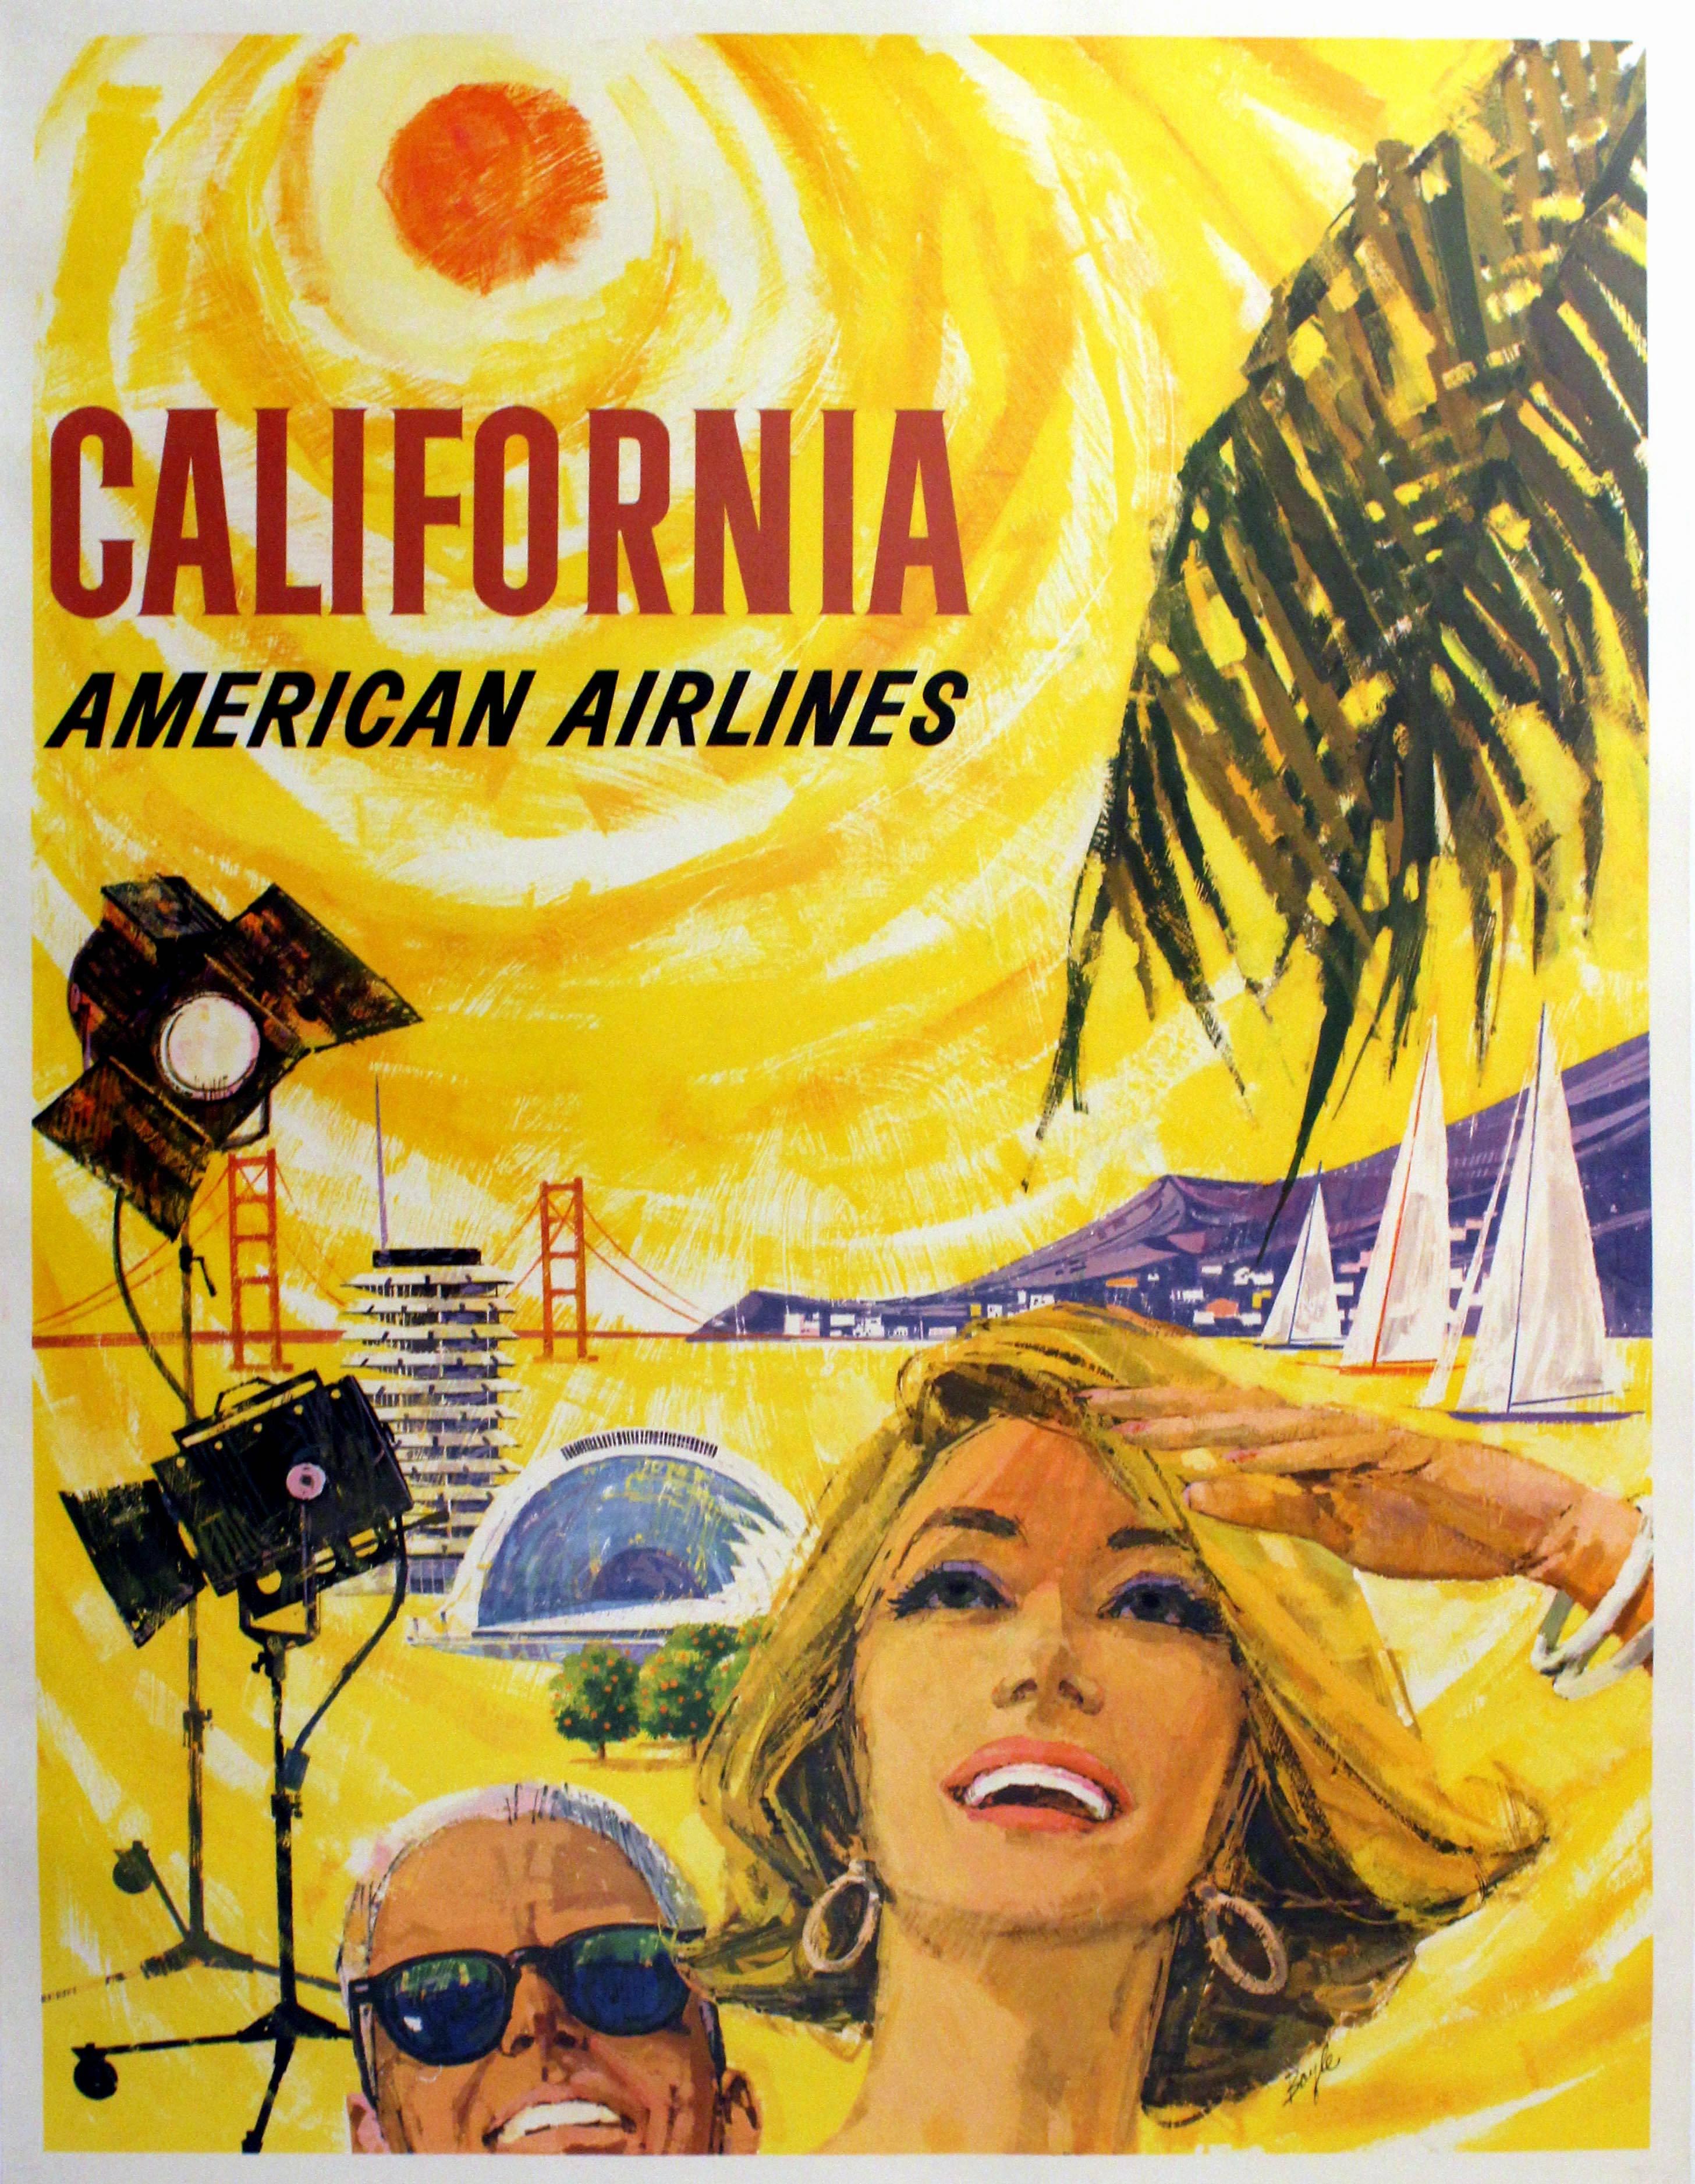 Unknown Print - Original Vintage 1950s Travel Poster Advertising California By American Airlines